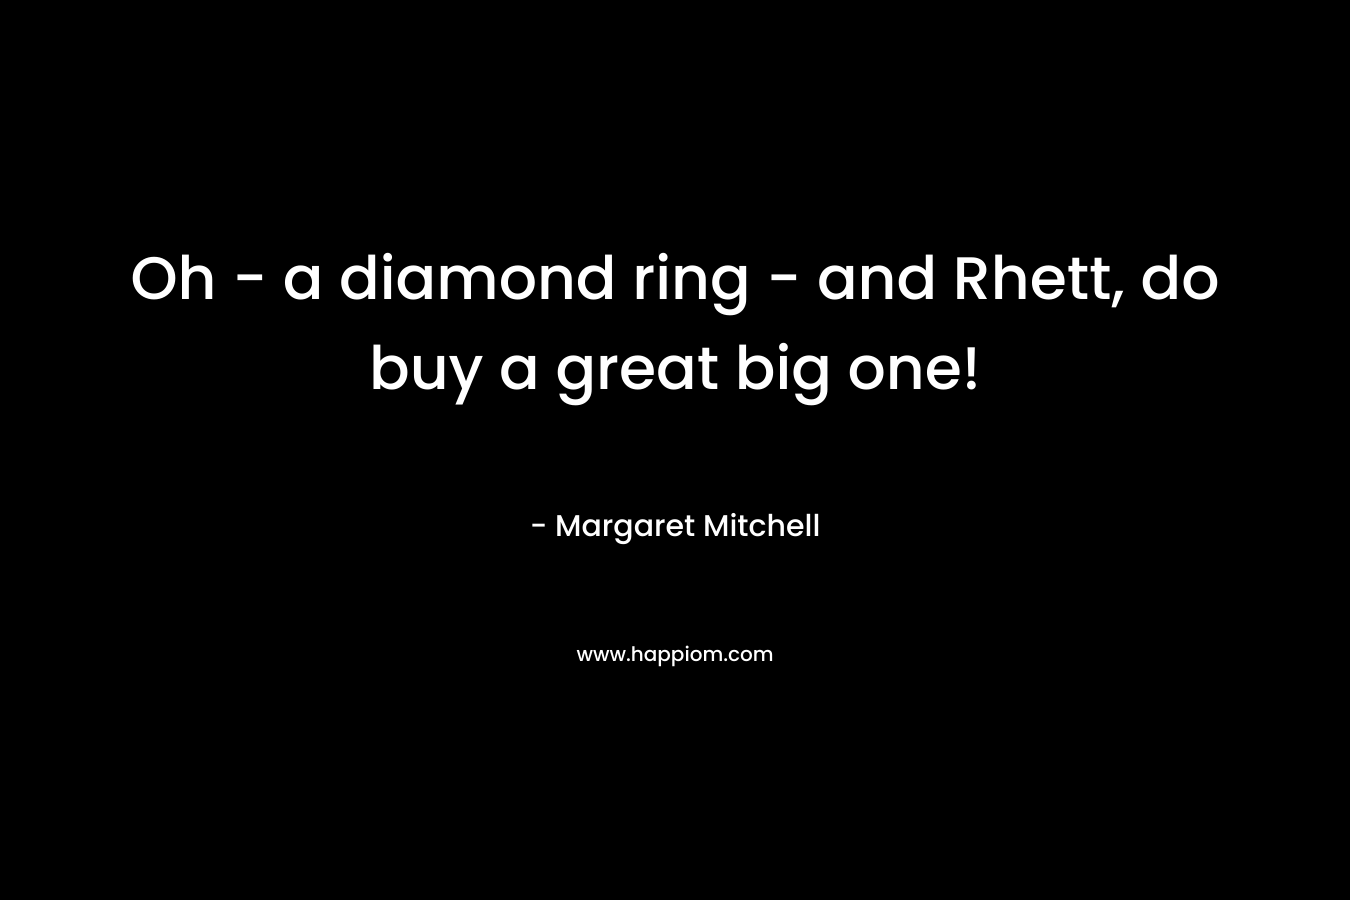 Oh - a diamond ring - and Rhett, do buy a great big one!